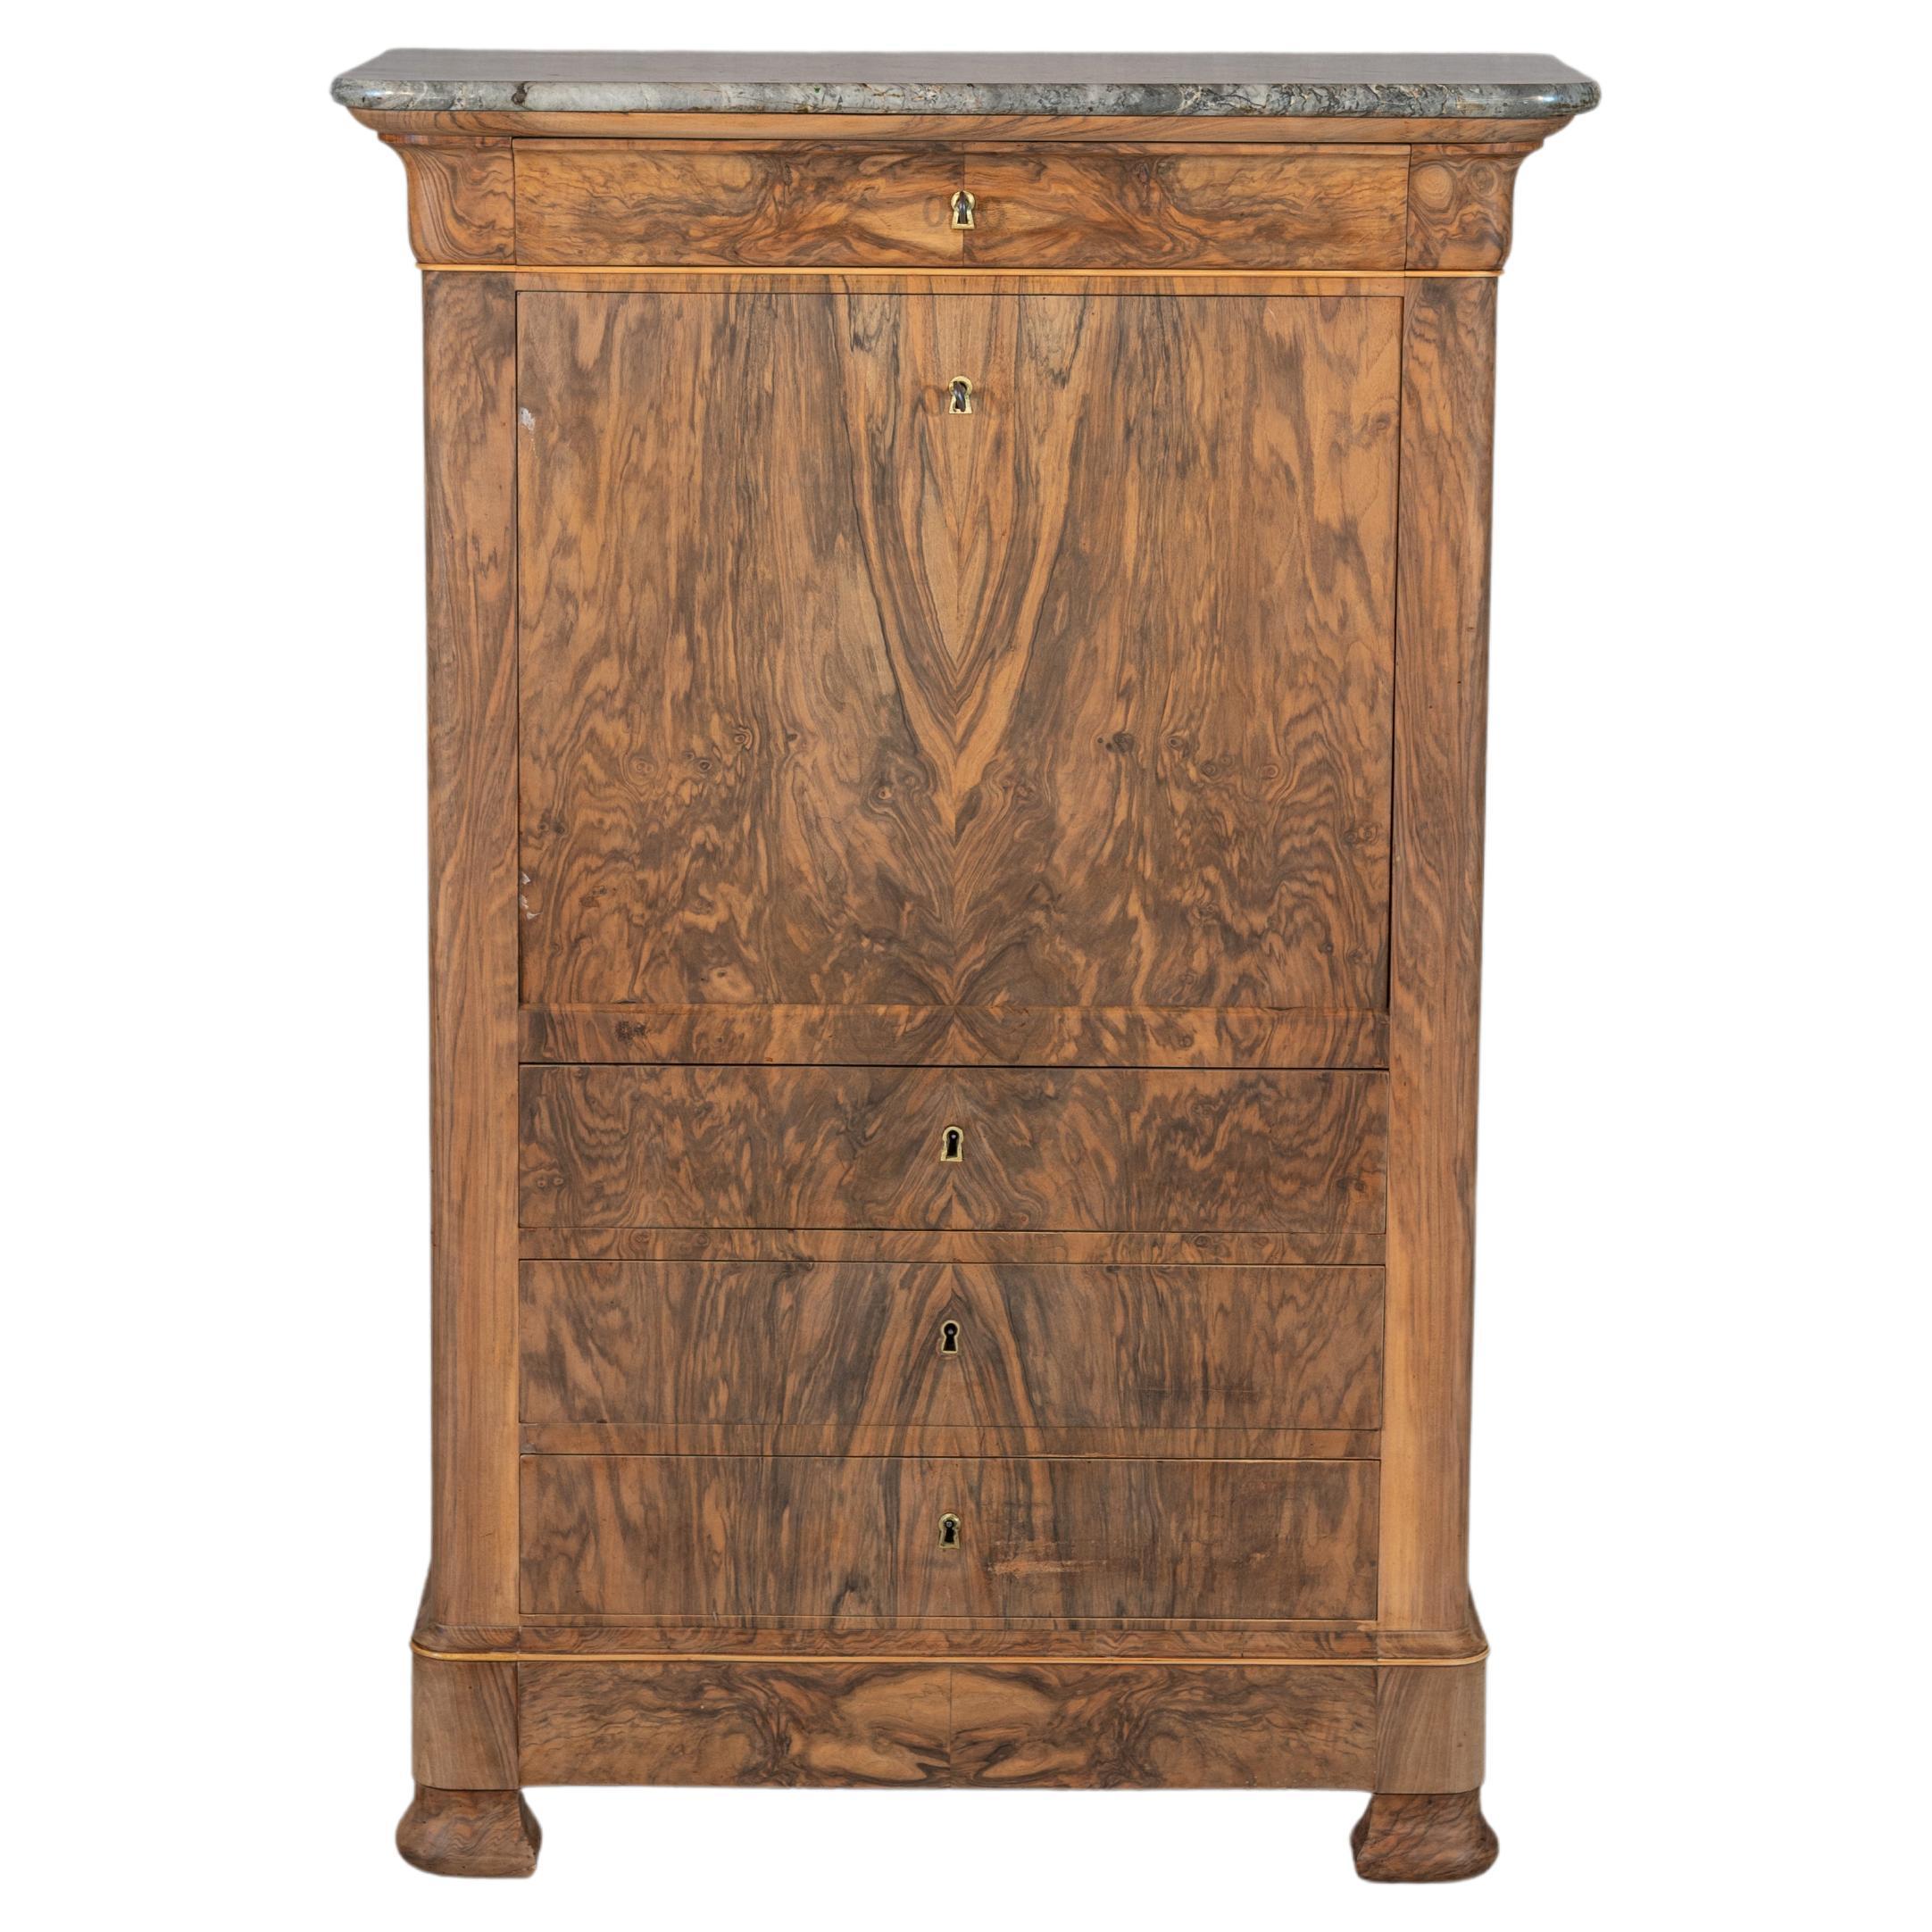 19th Century Louis-Philippe Period French Secretary For Sale